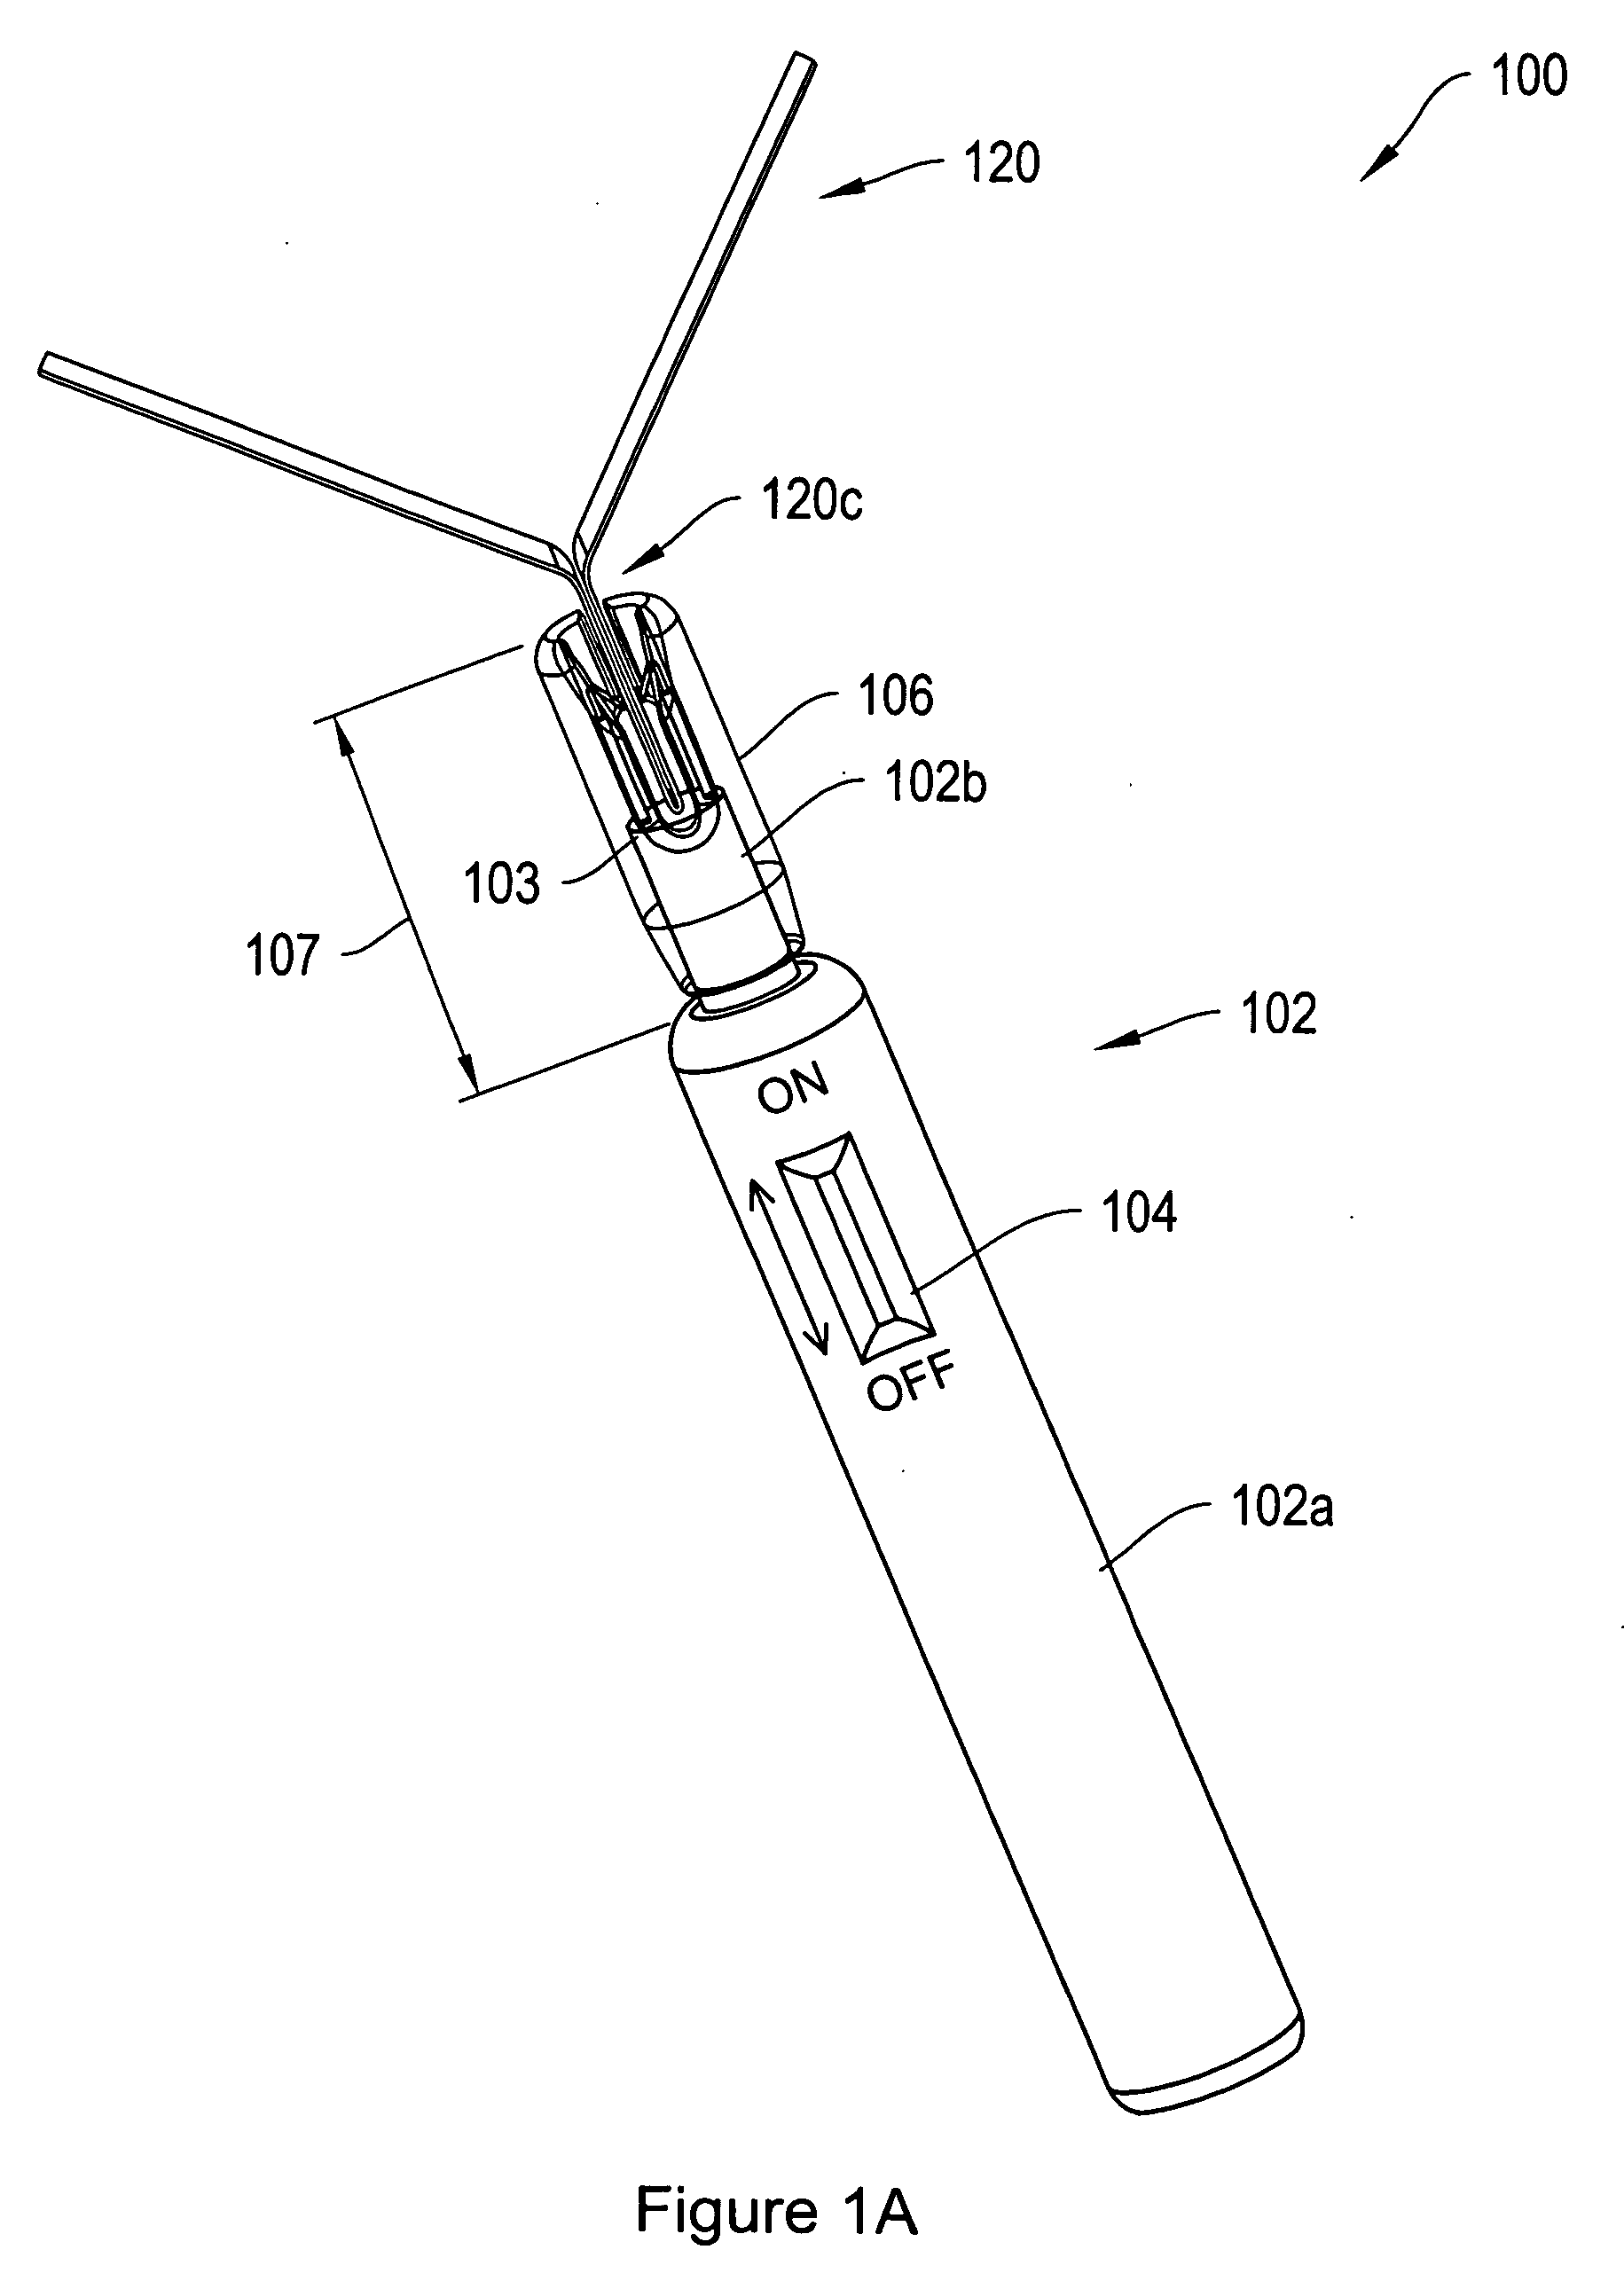 Apparatus and methods for modulating the size of an implantable sling